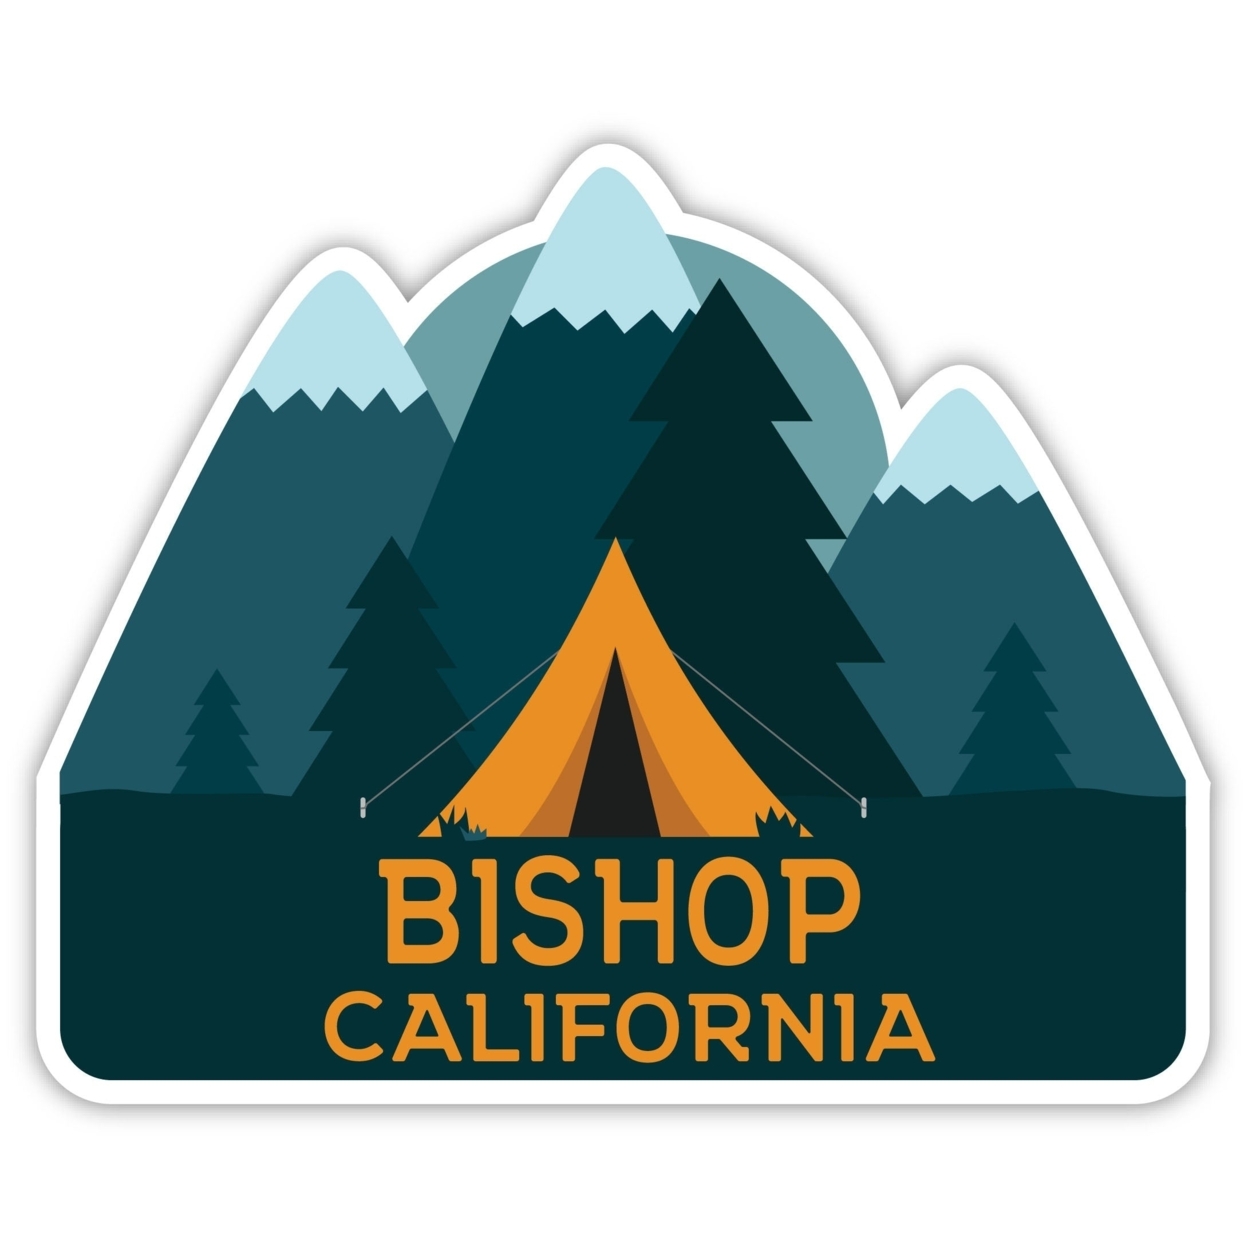 Bishop California Souvenir Decorative Stickers (Choose Theme And Size) - 4-Pack, 12-Inch, Tent